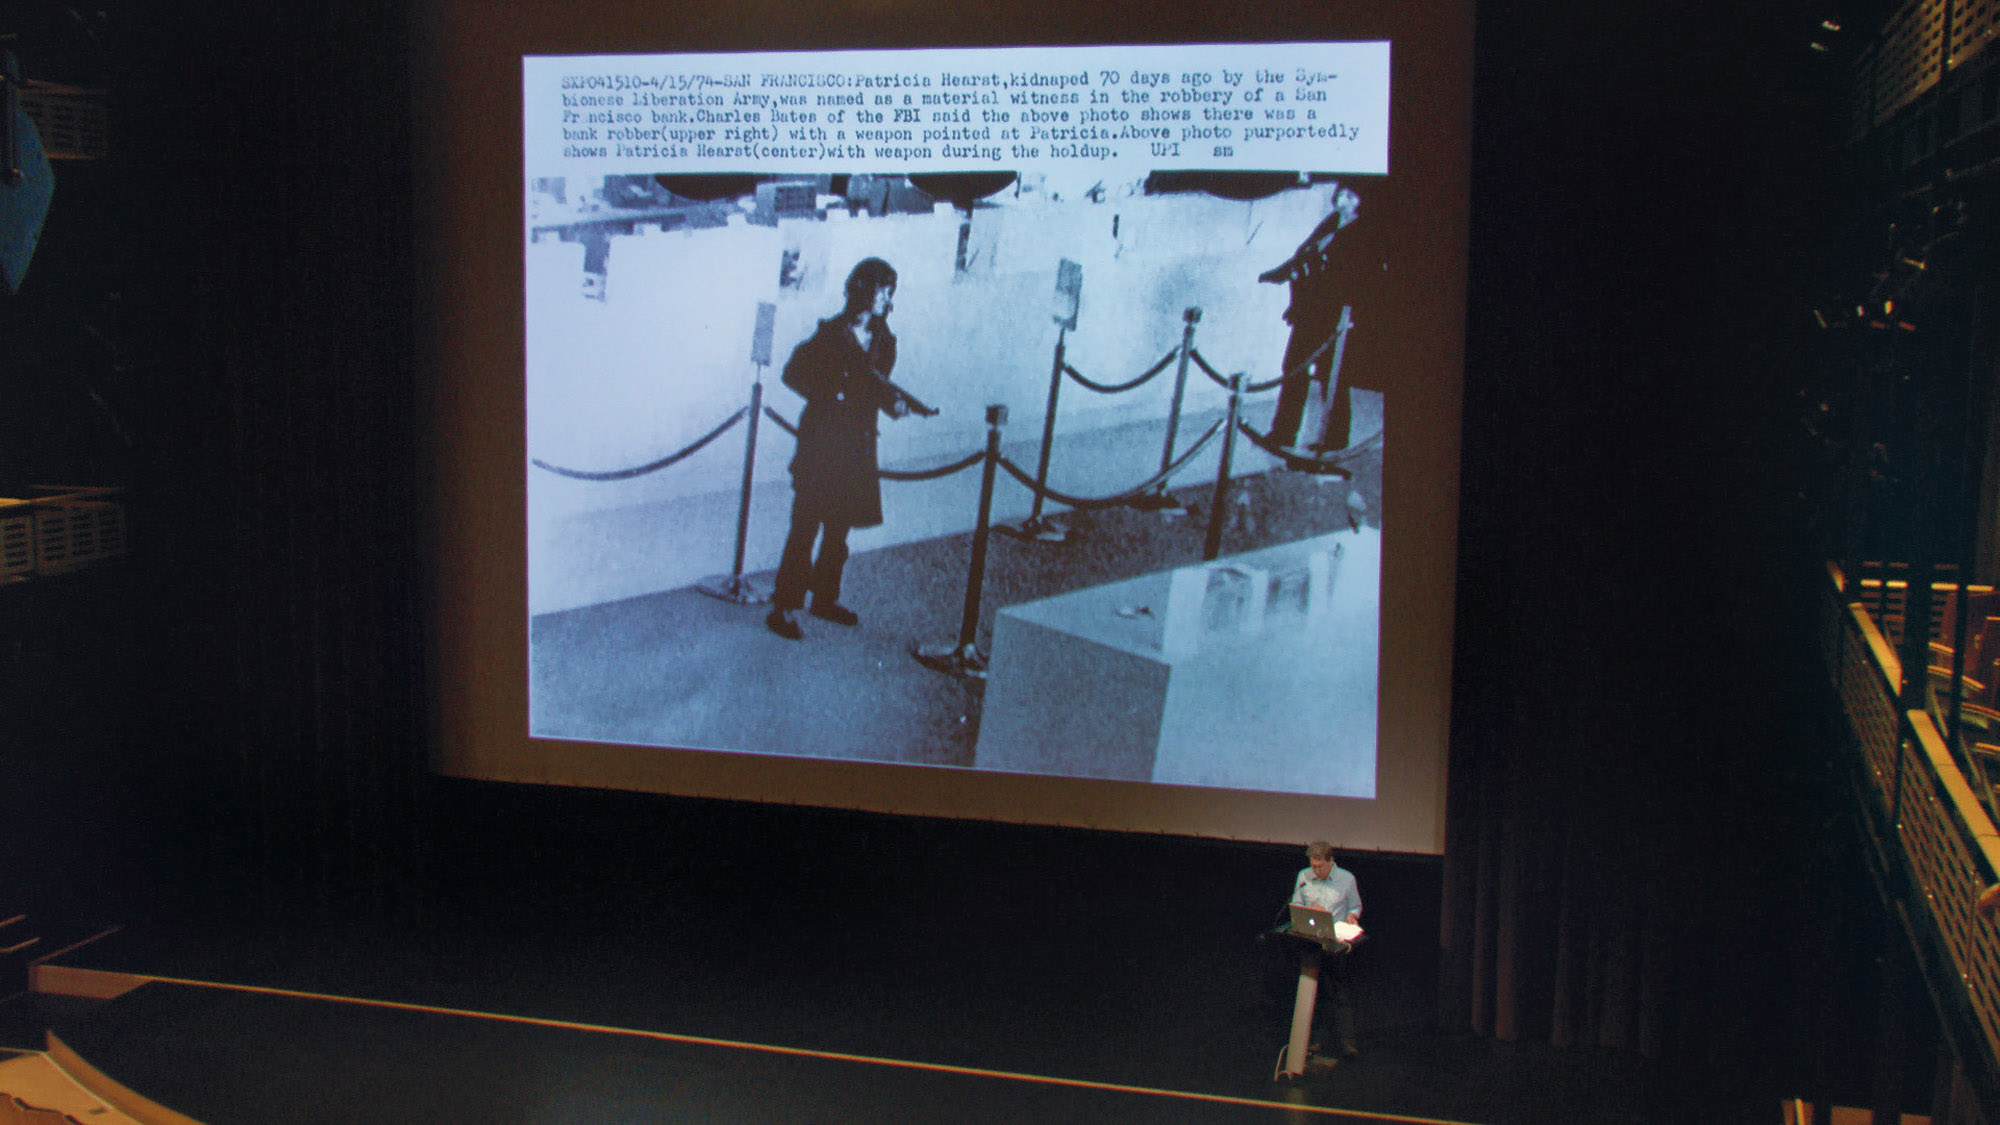 Thomas Keenan on stage in front of a large projection of an image of Patricia Hearst robbing a bank 